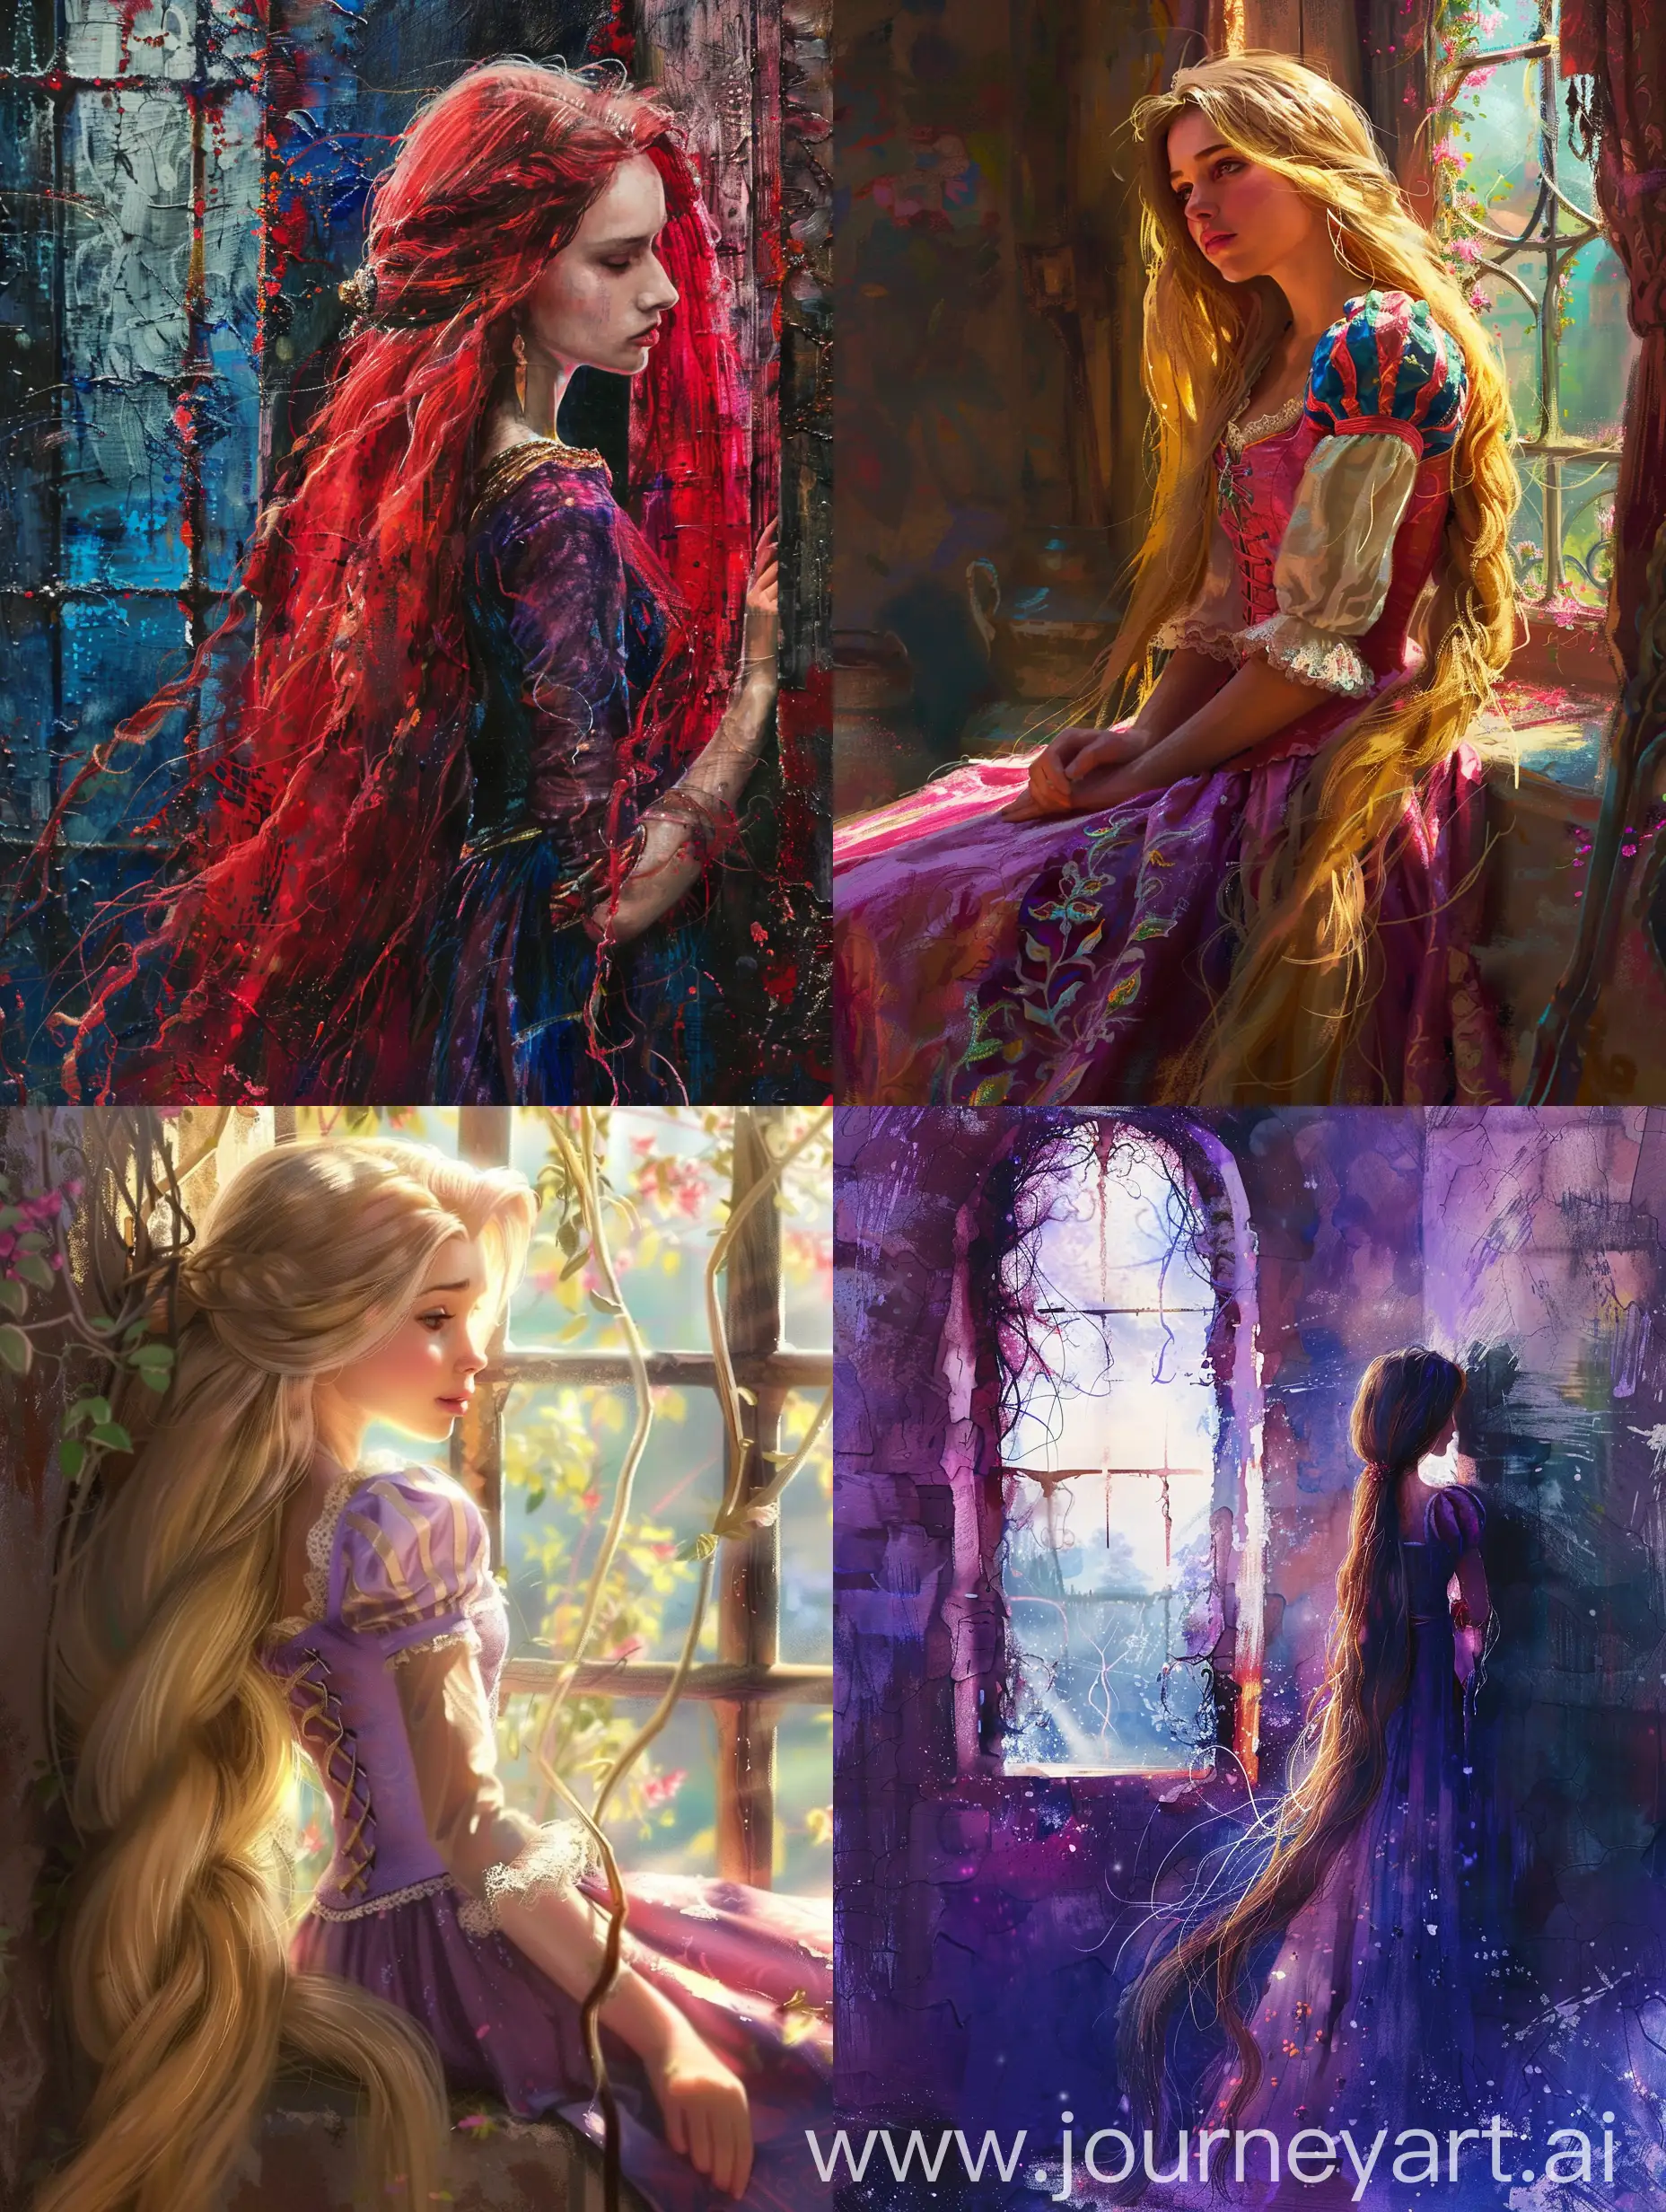 Vicente Romero style of the princess Rapunzel at an open tower window letting her extremely long 10 foot hair down out the window:: shades of red and blue and purple